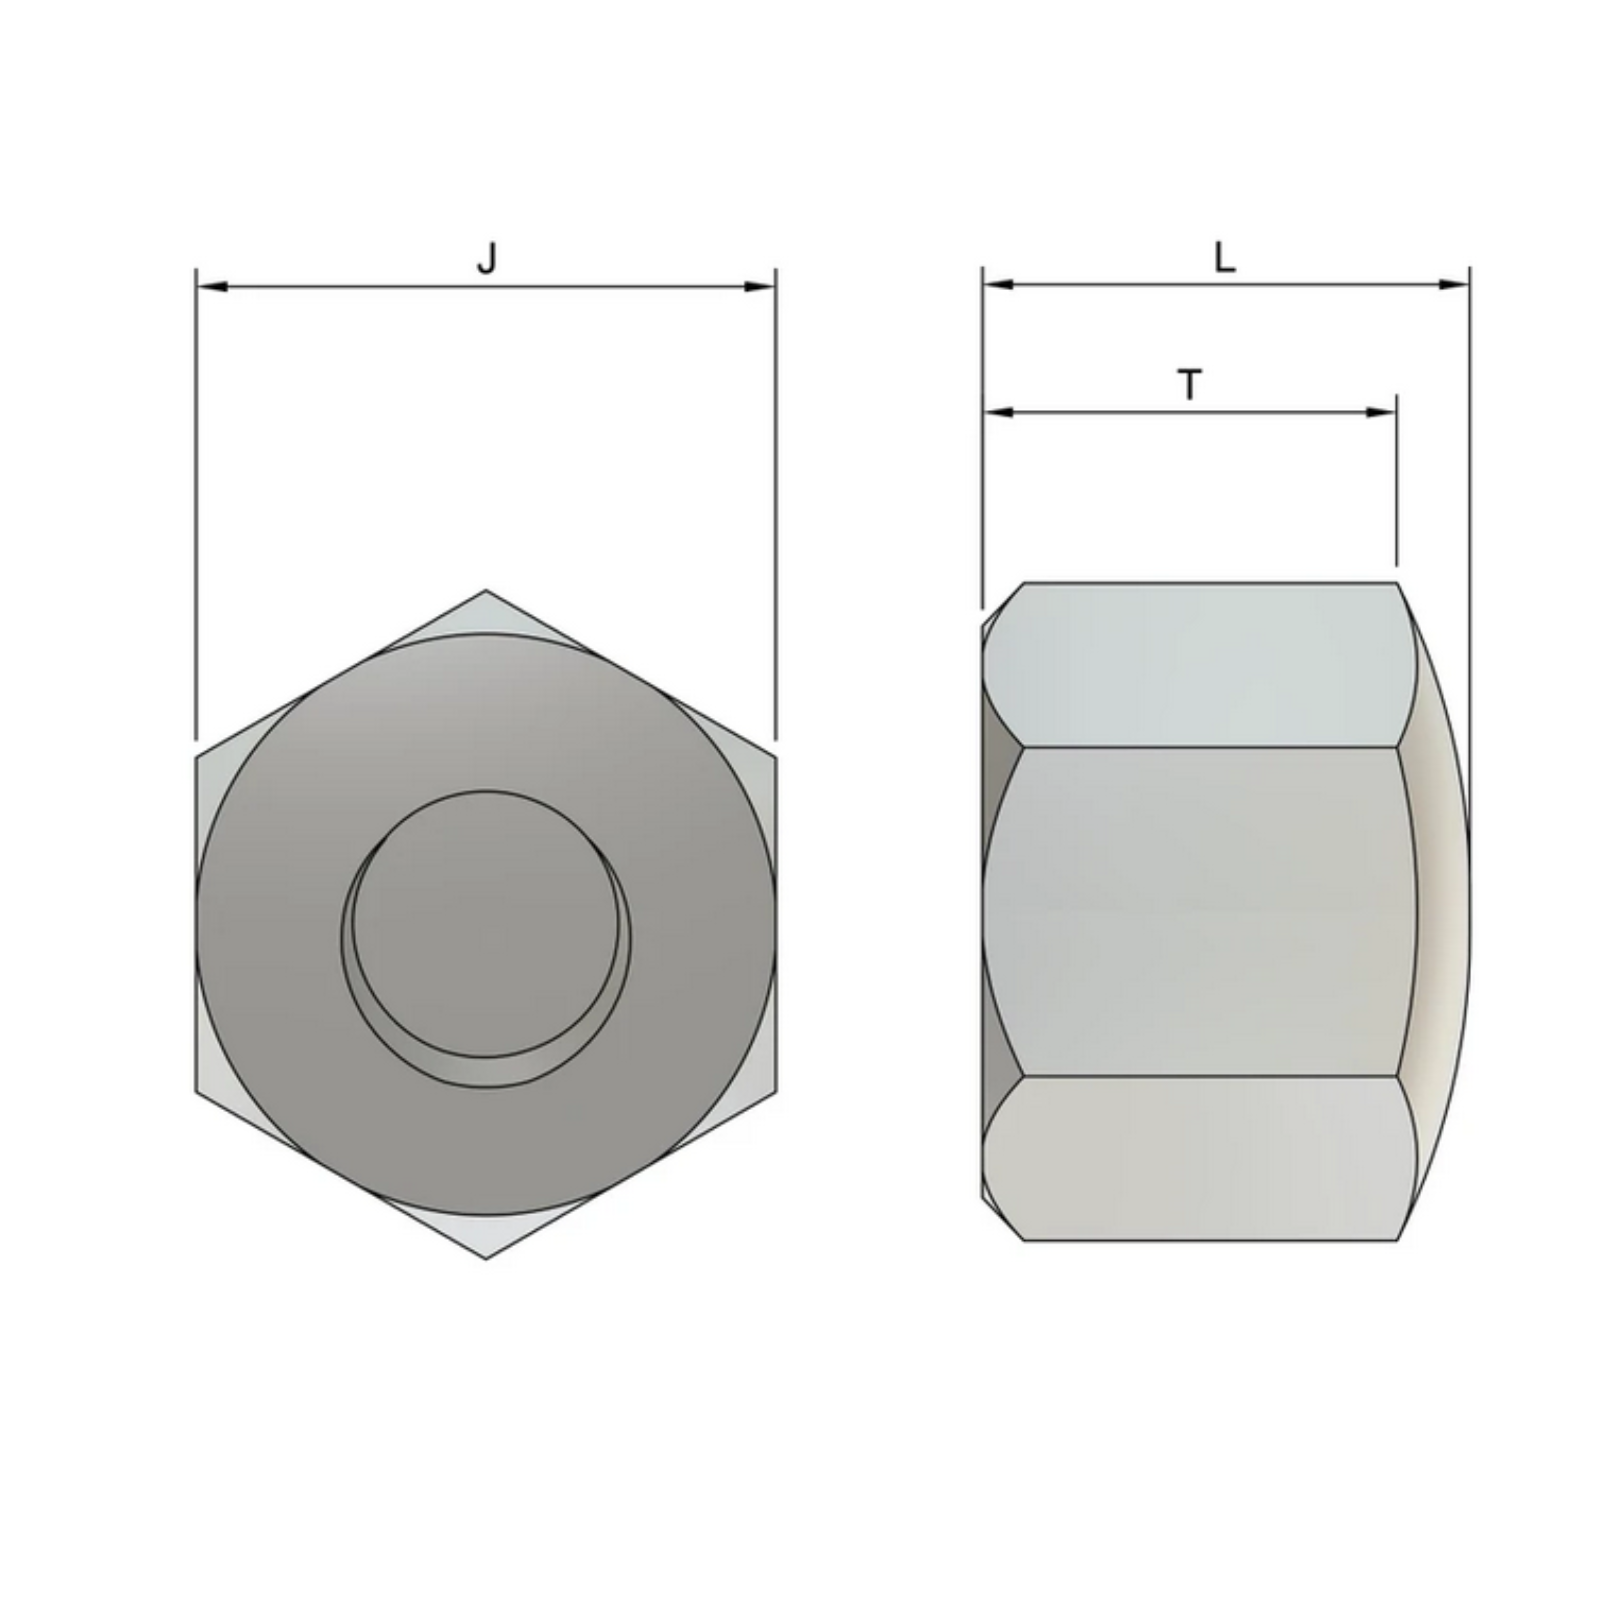 M4 Cap Nuts (DIN 917) - Stainless Steel (A2)